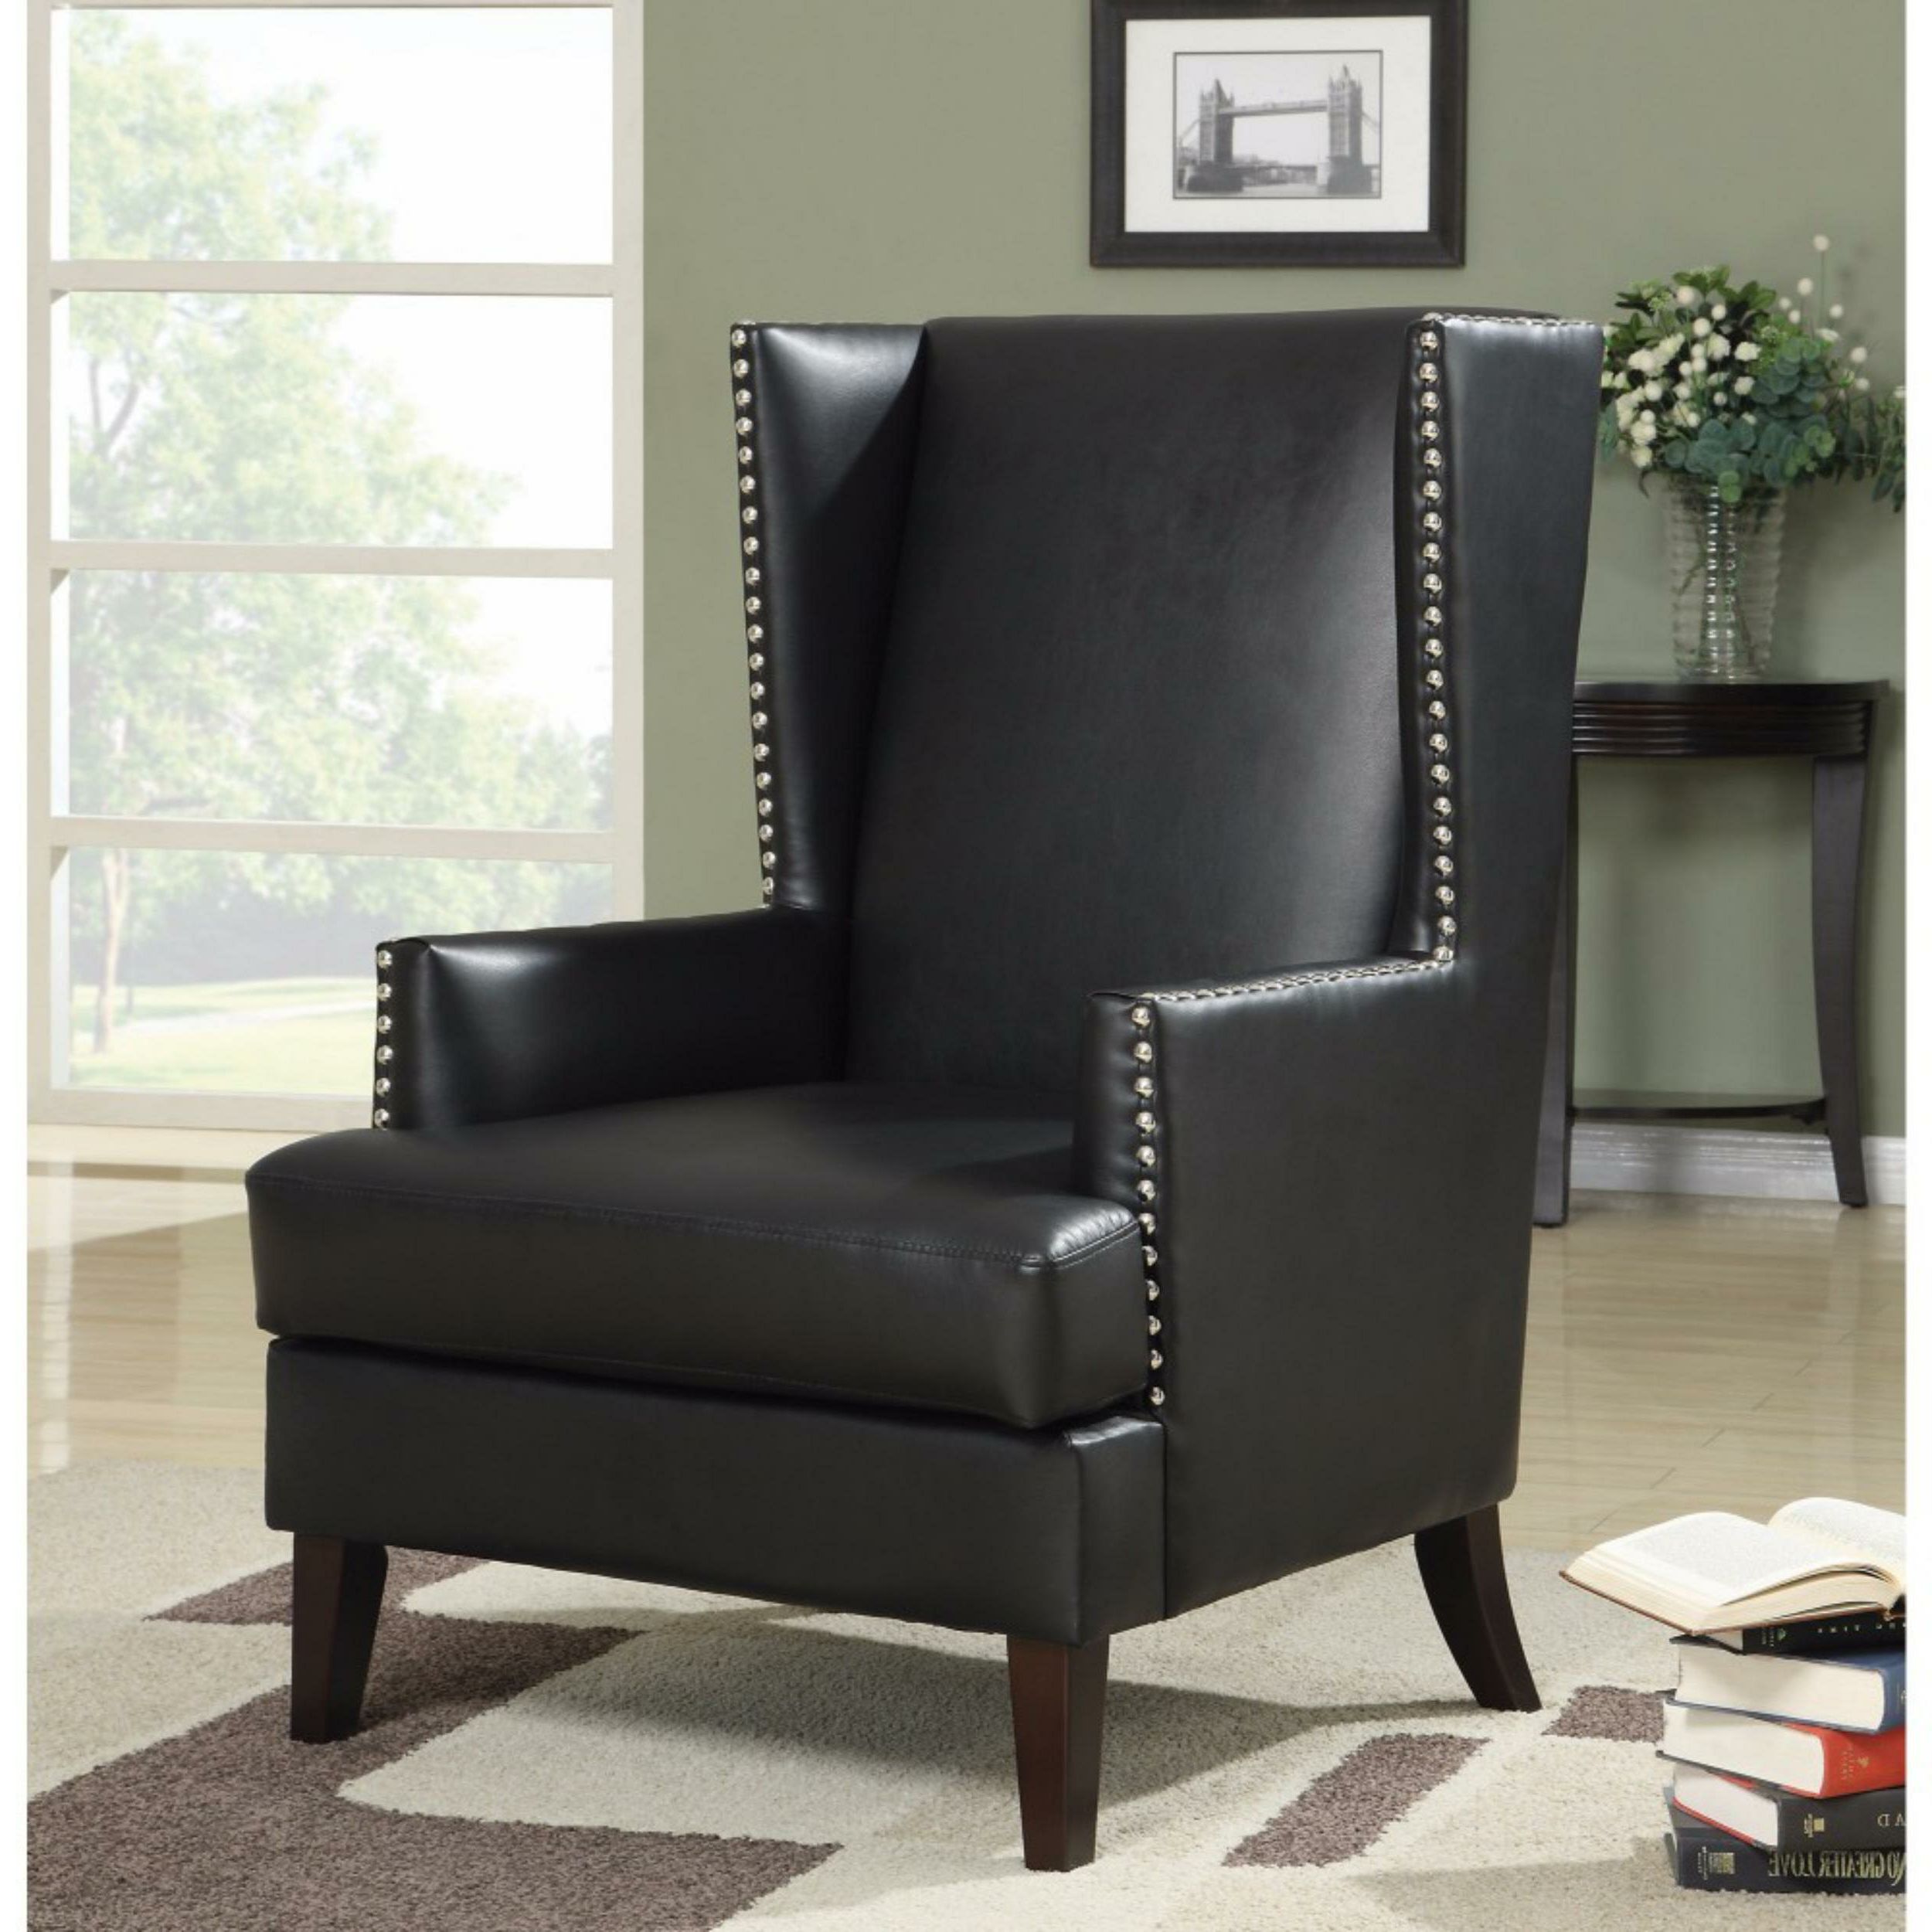 Kephart 32" W Faux Leather Wingback Chair Intended For Most Up To Date Sweetwater Wingback Chairs (View 15 of 20)